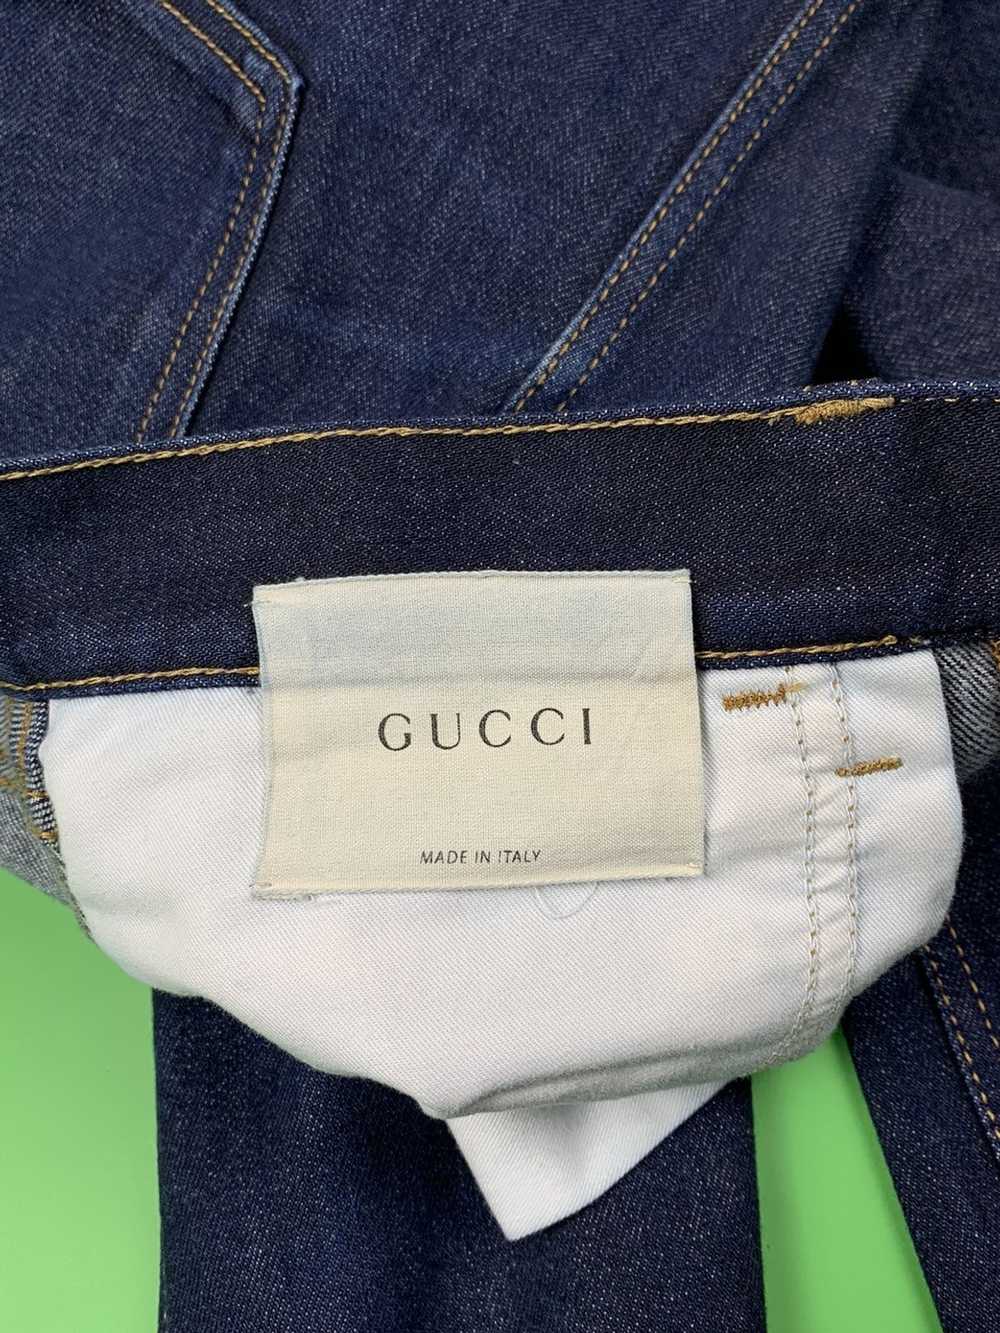 Gucci Gucci Tiger Embroidered Denim Pants - image 11